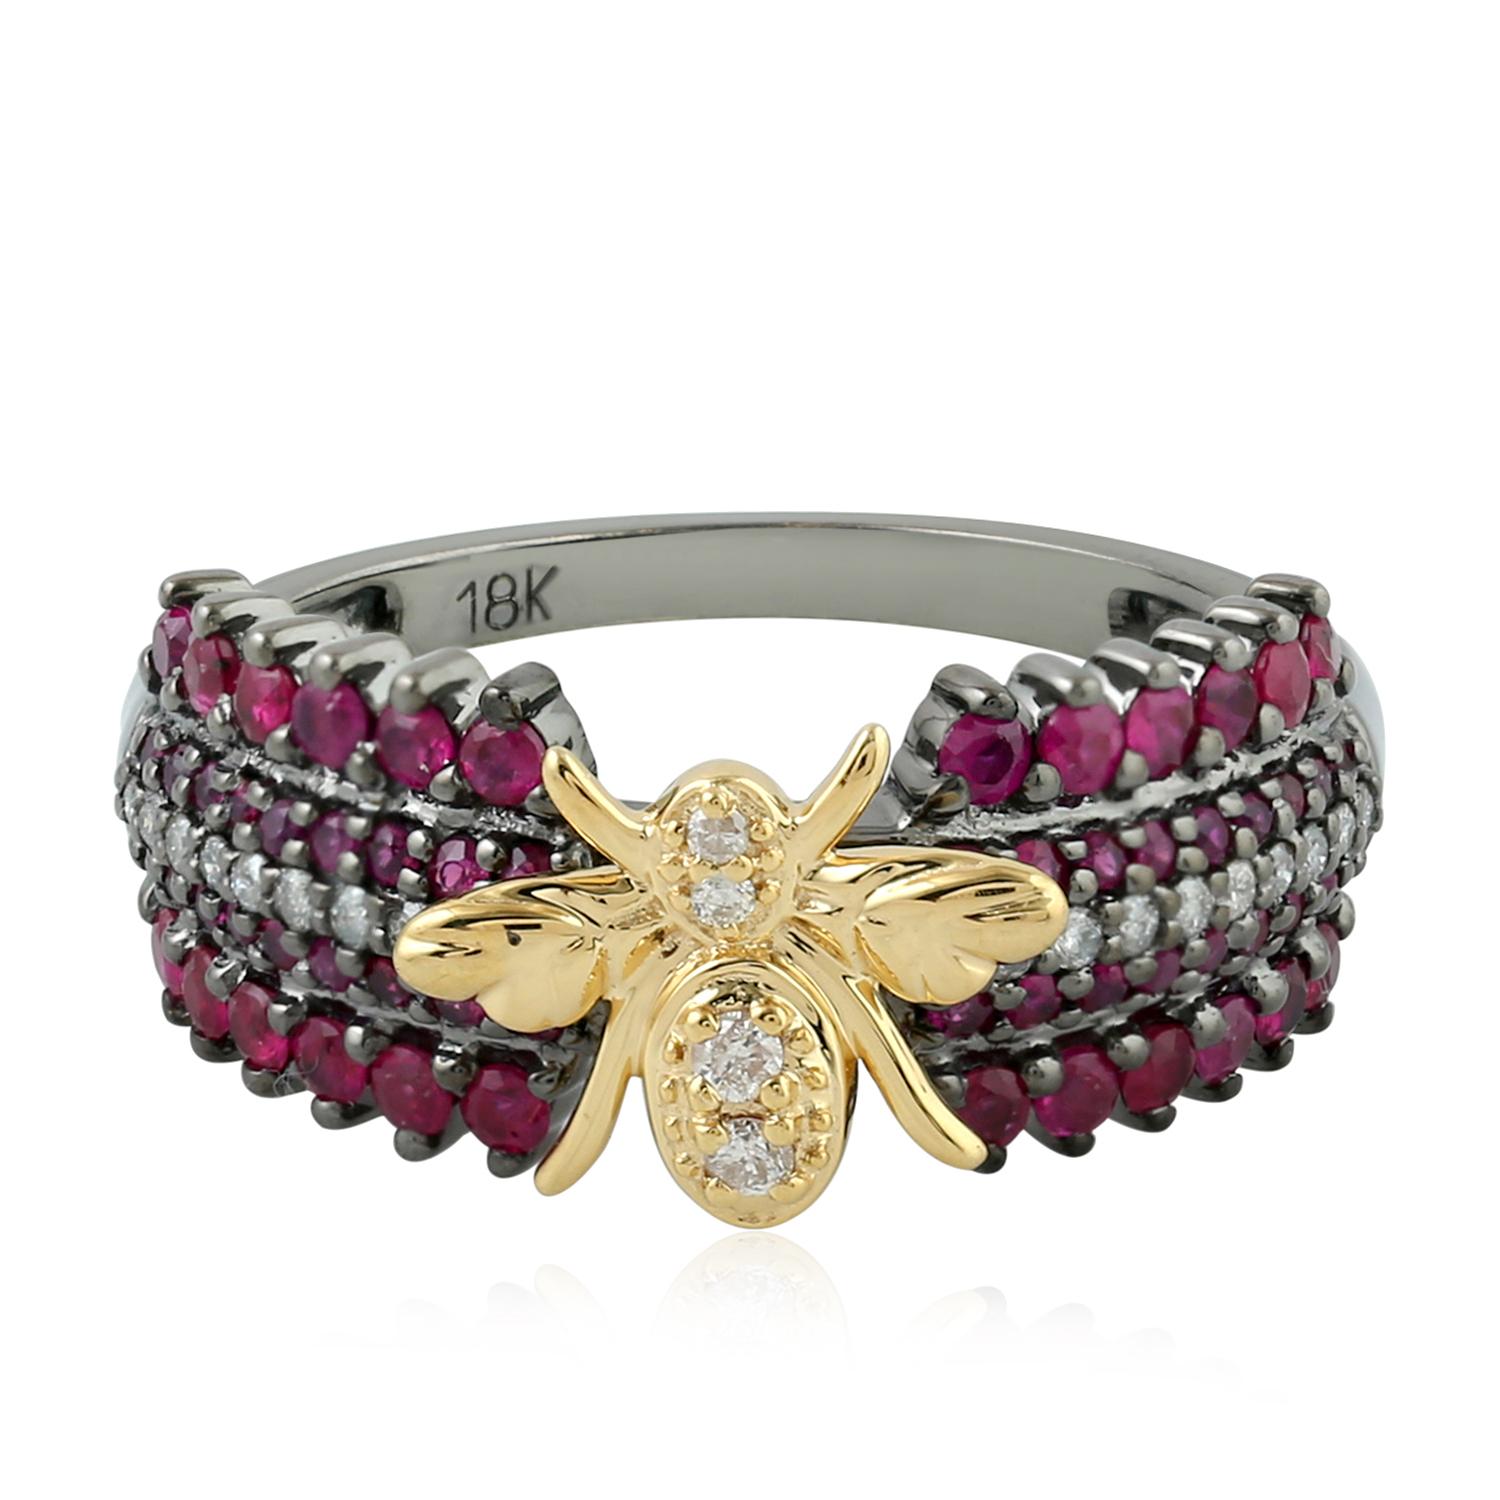 Mixed Cut Ruby & Diamond Ring With Center Housefly Figure Made In 18k Yellow Gold For Sale